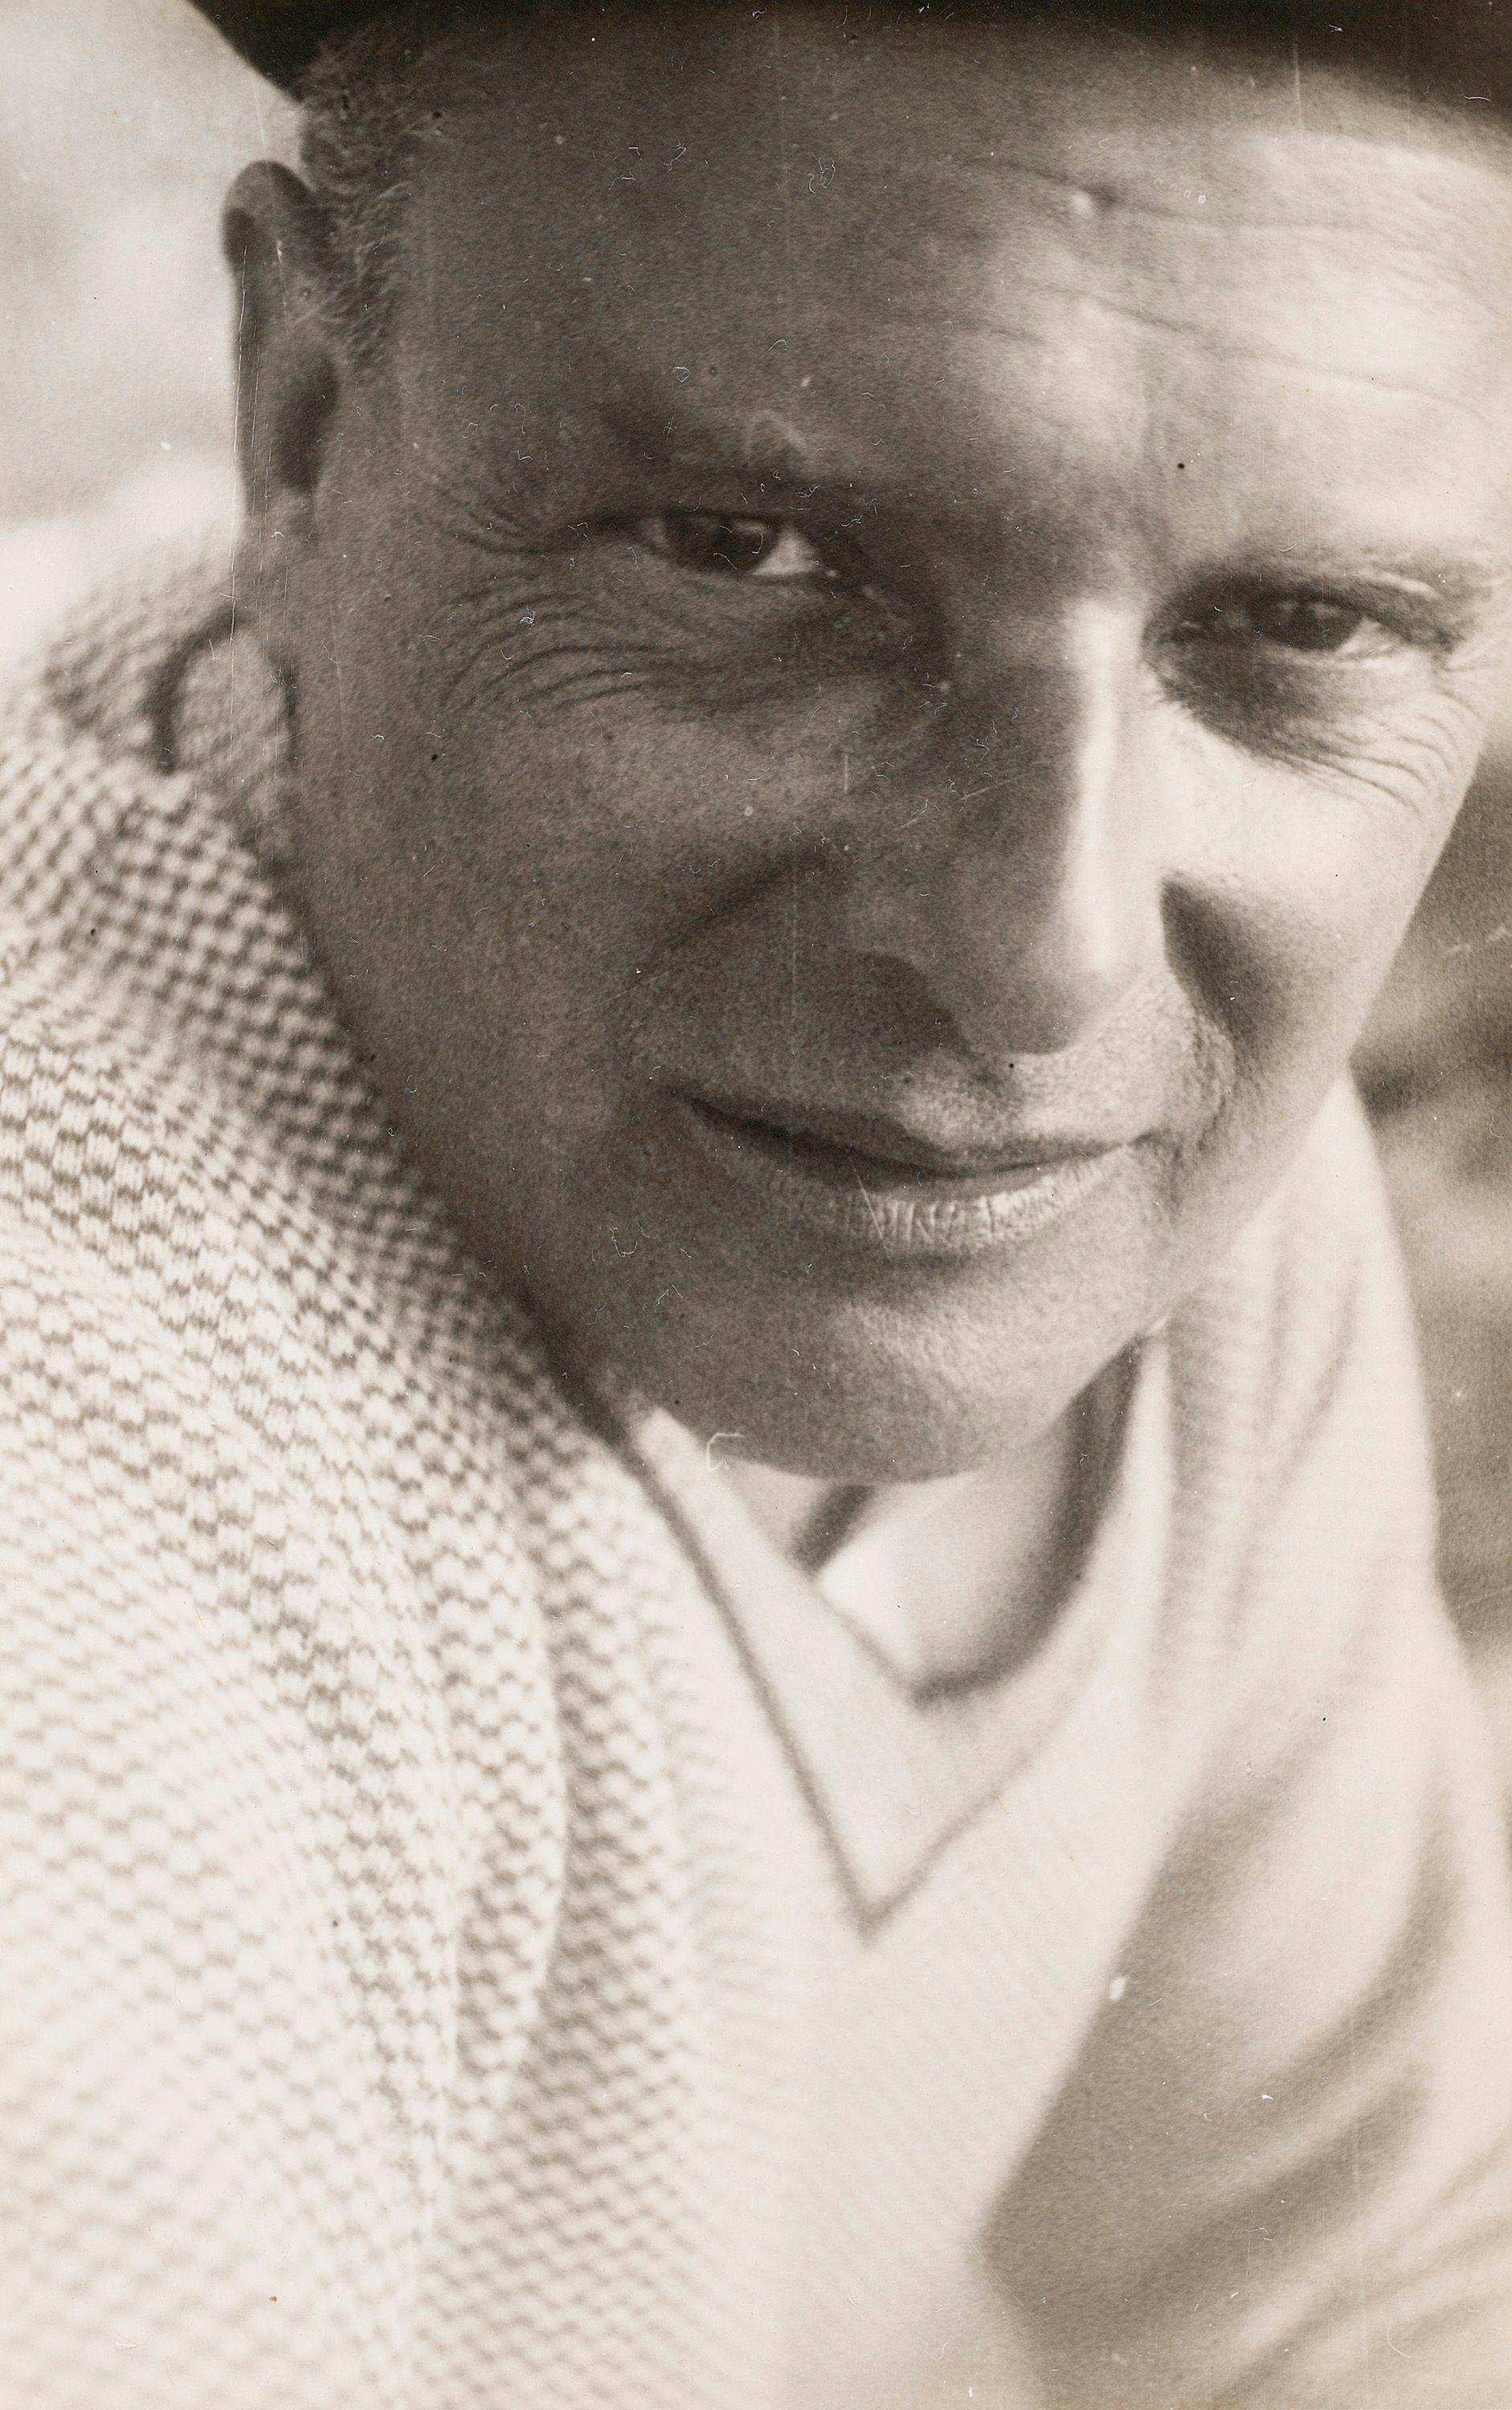 A photograph of Paul Klee by Josef Albers, dated 1929.